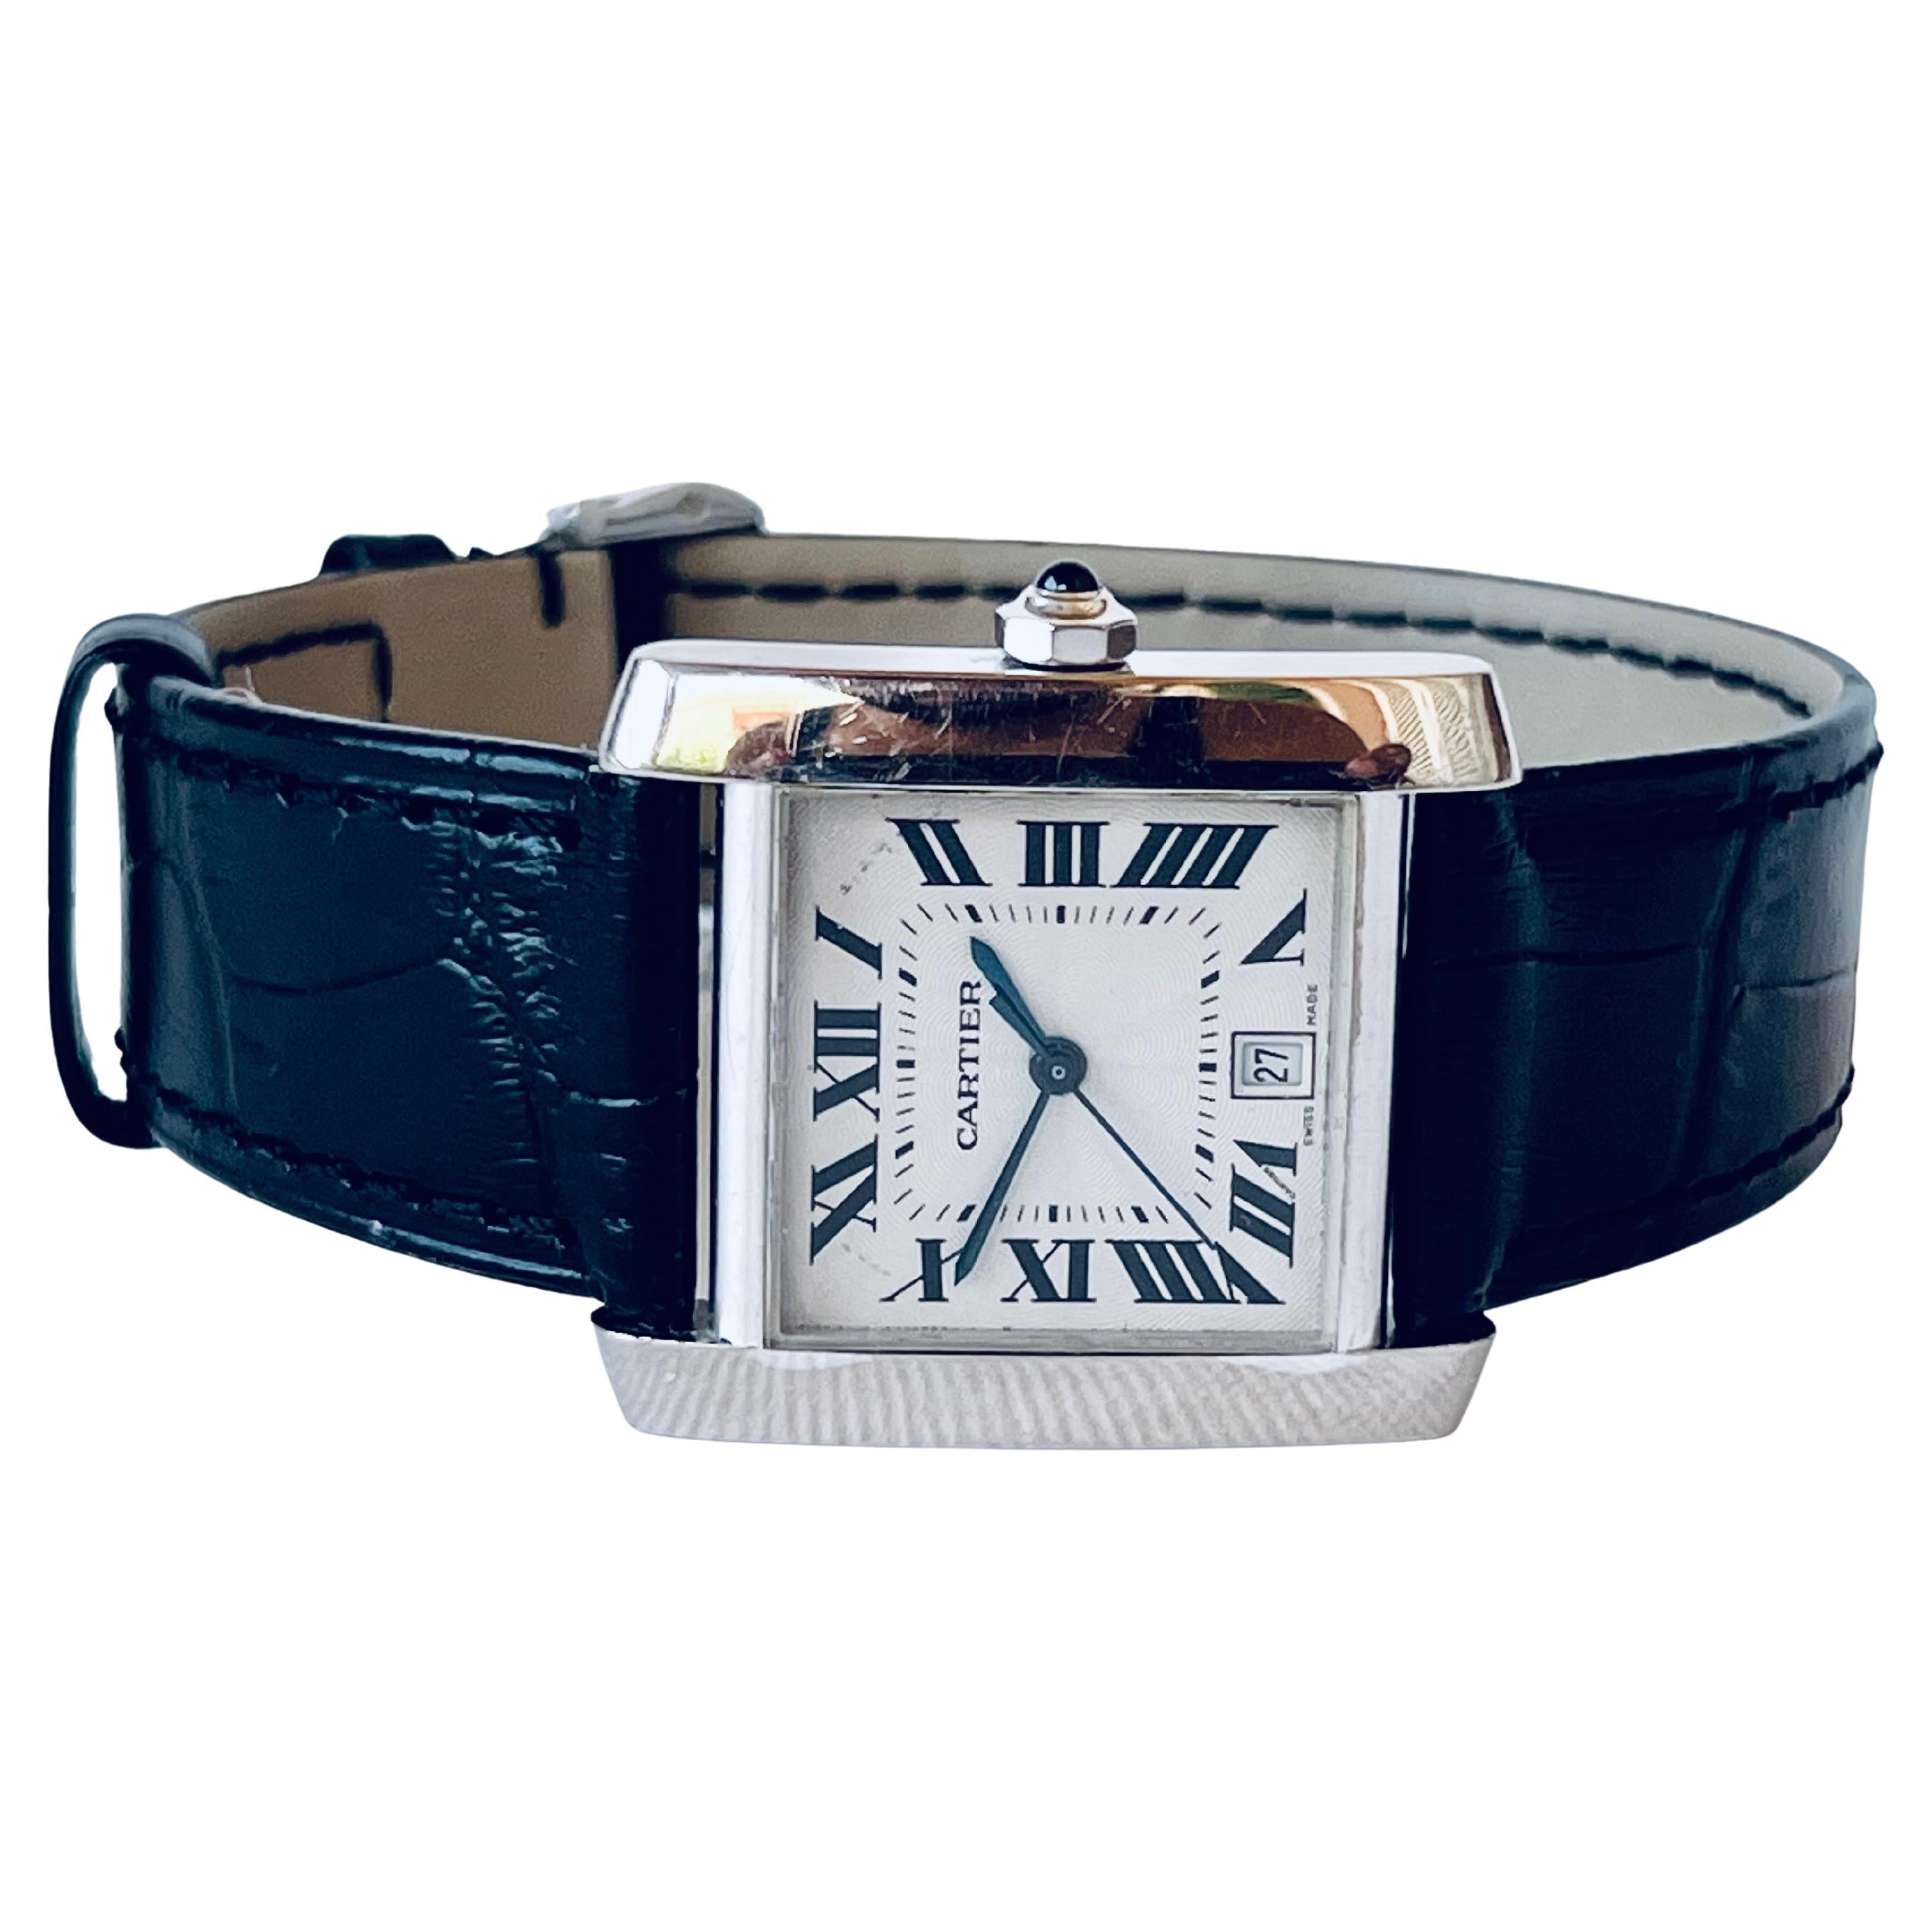  Cartier Tank Française 18K White Gold 2366 Automatic Date Watch   For Sale